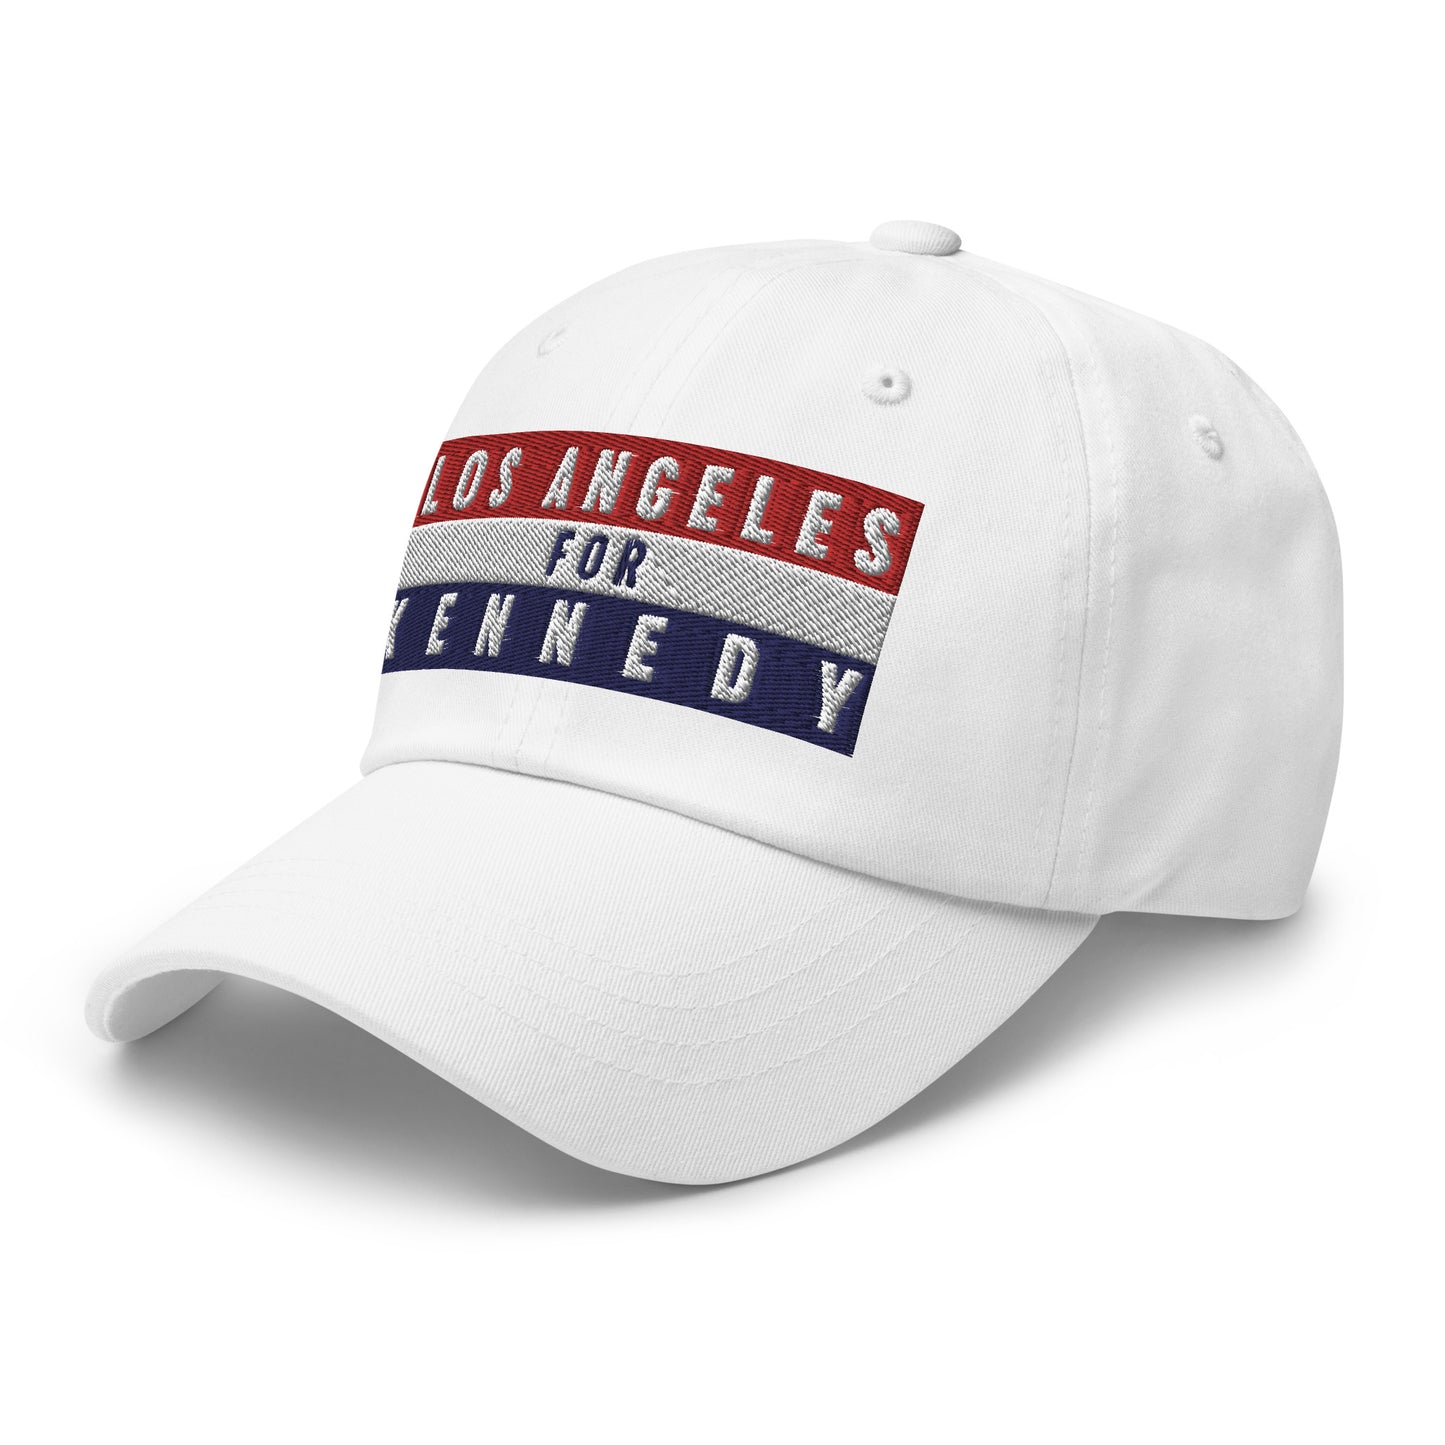 Los Angeles for Kennedy Dad Hat